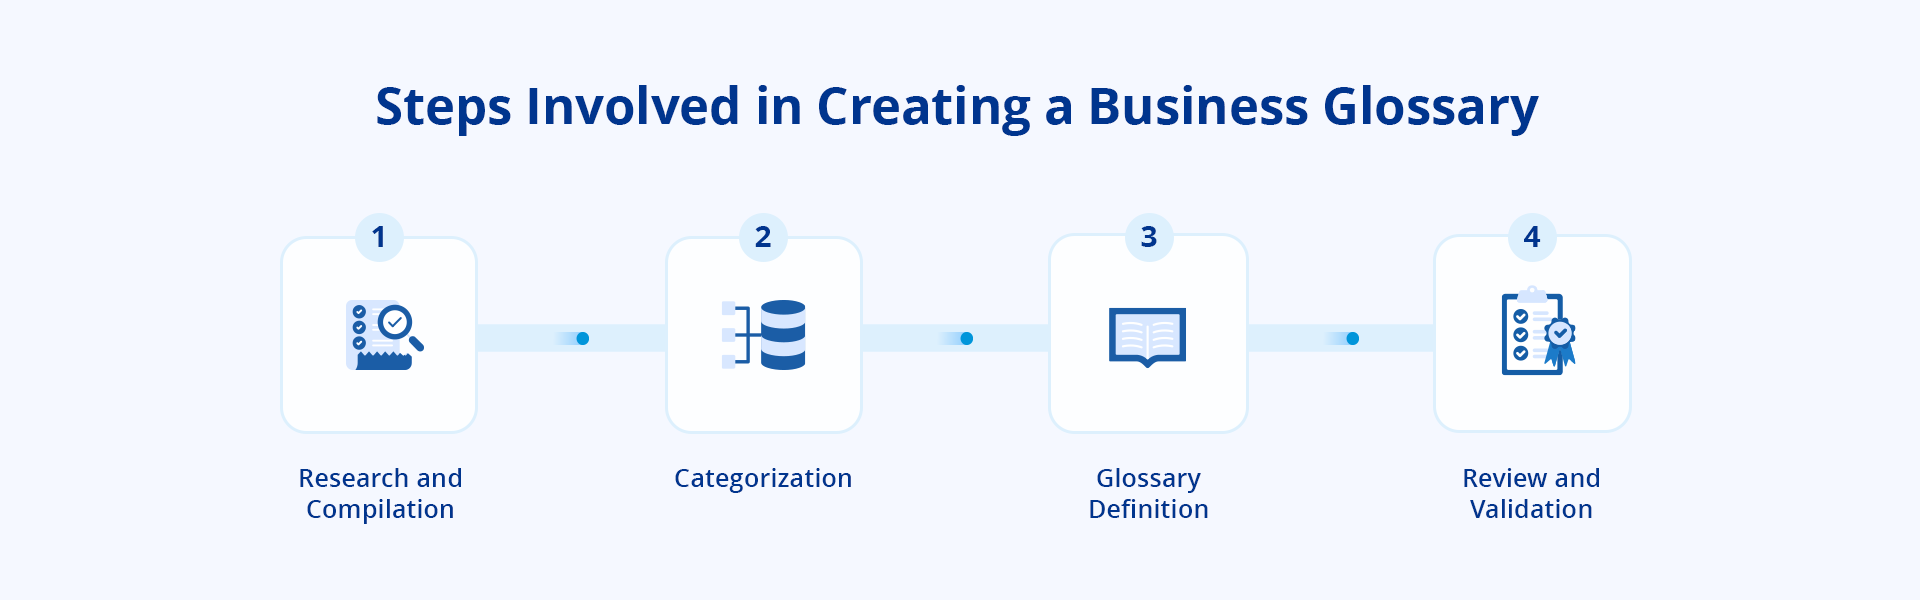 Steps involved in creating a business glossary